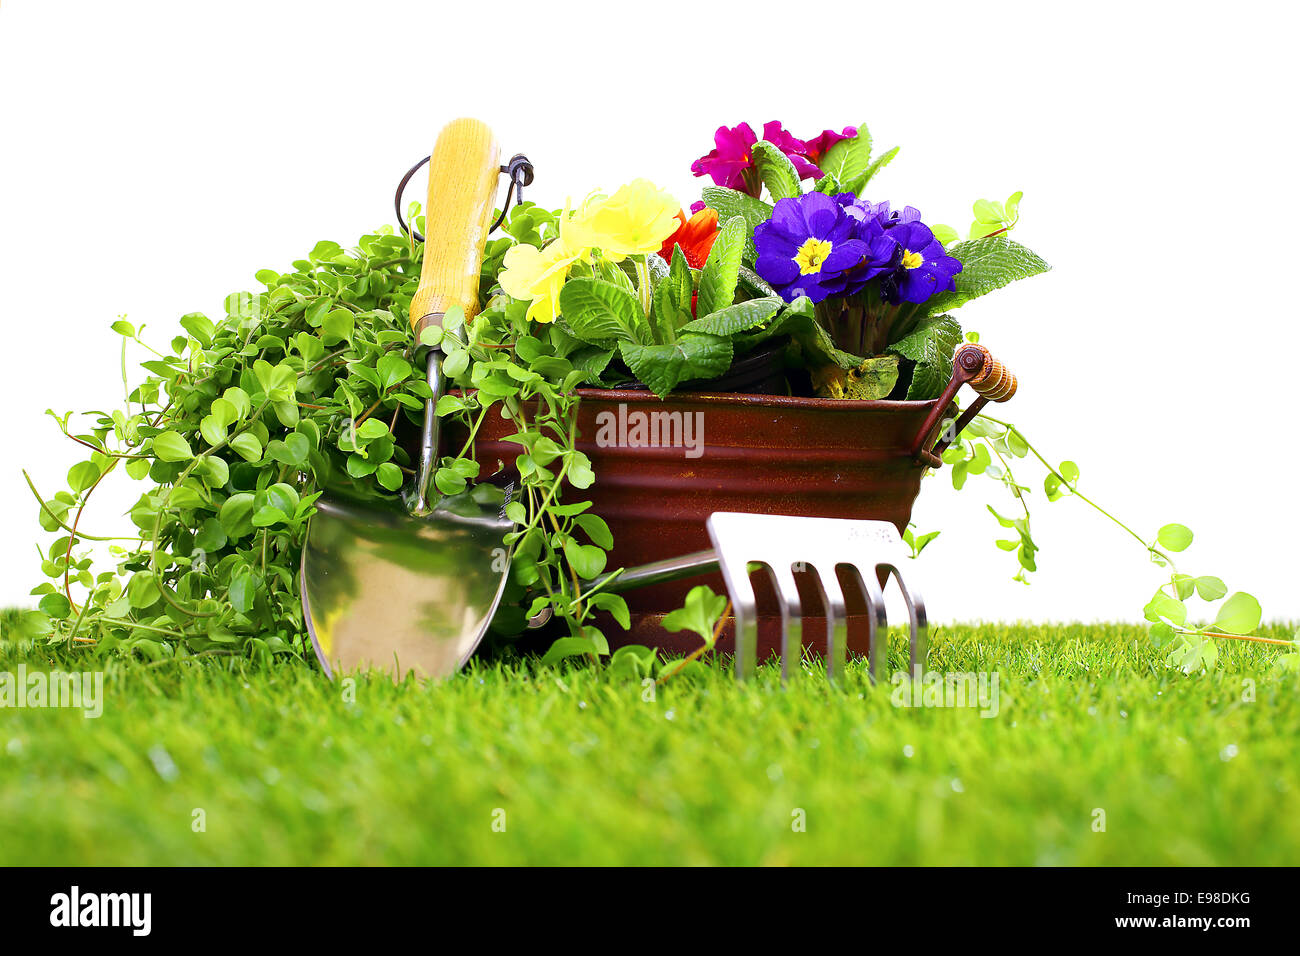 Gardening tools like a cultivator, trowel and a metal flower vase with pansies on a green lawn and white background Stock Photo